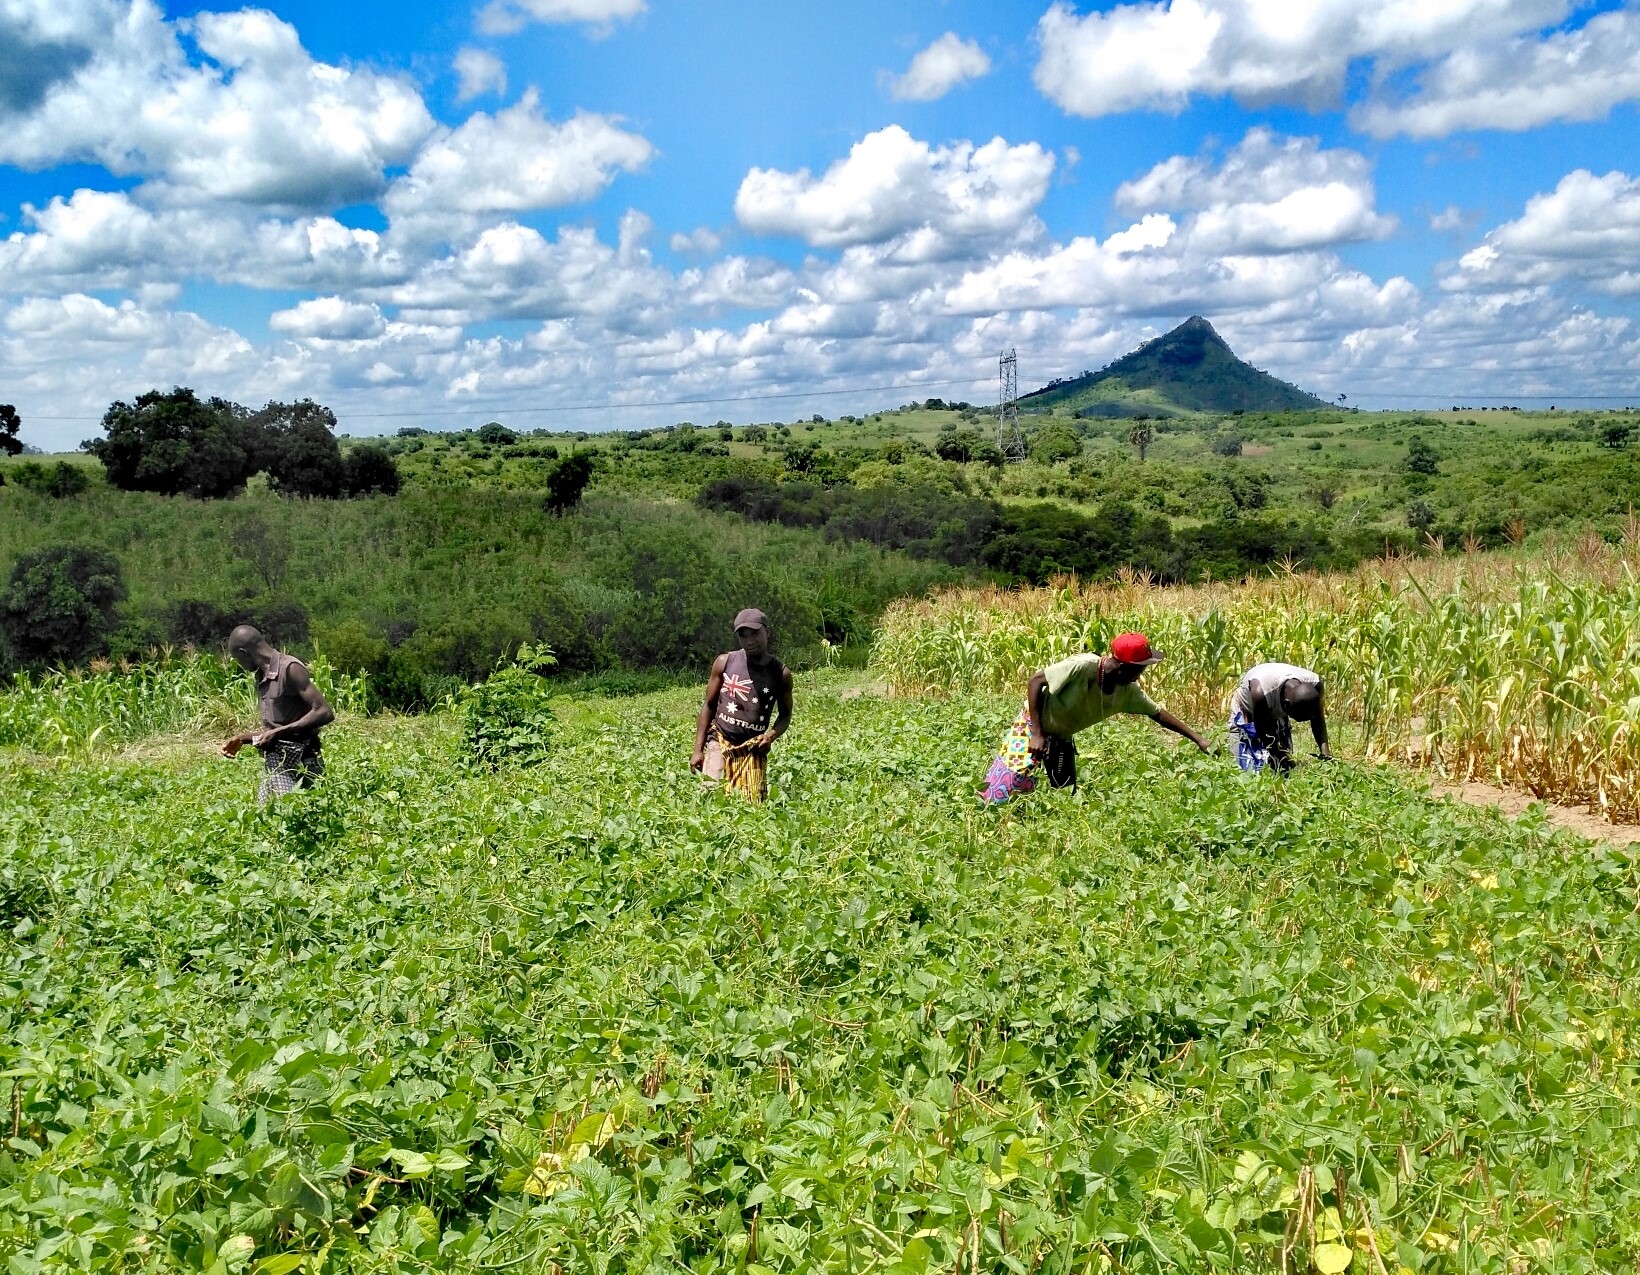 Hardships Can’t Stop God’s Work on This Farm in Mozambique